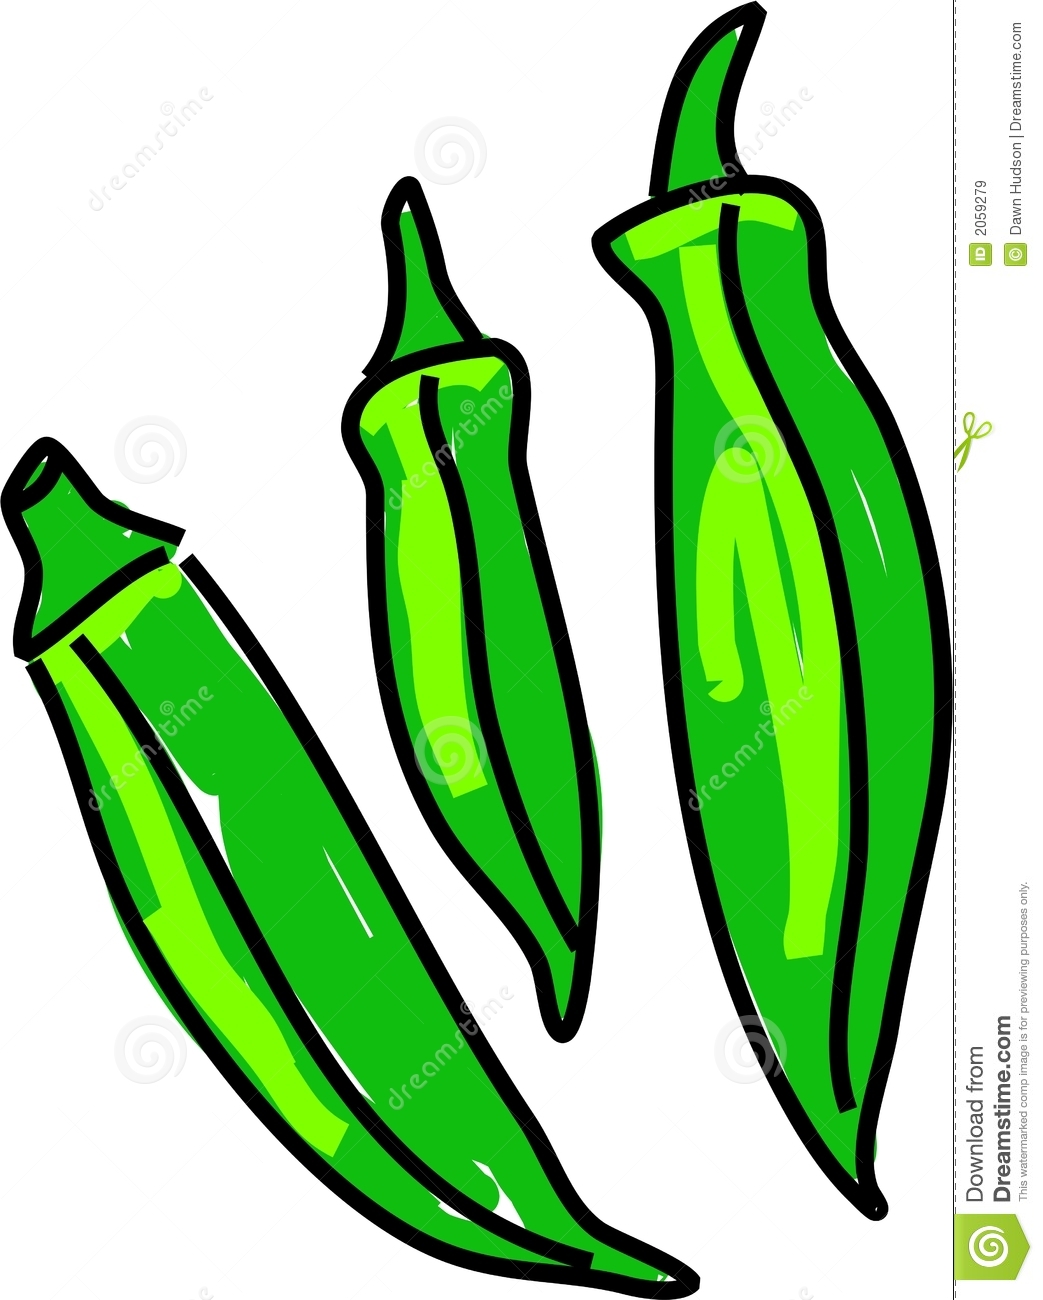 Okra Isolated On White Drawn In Toddler Art Style